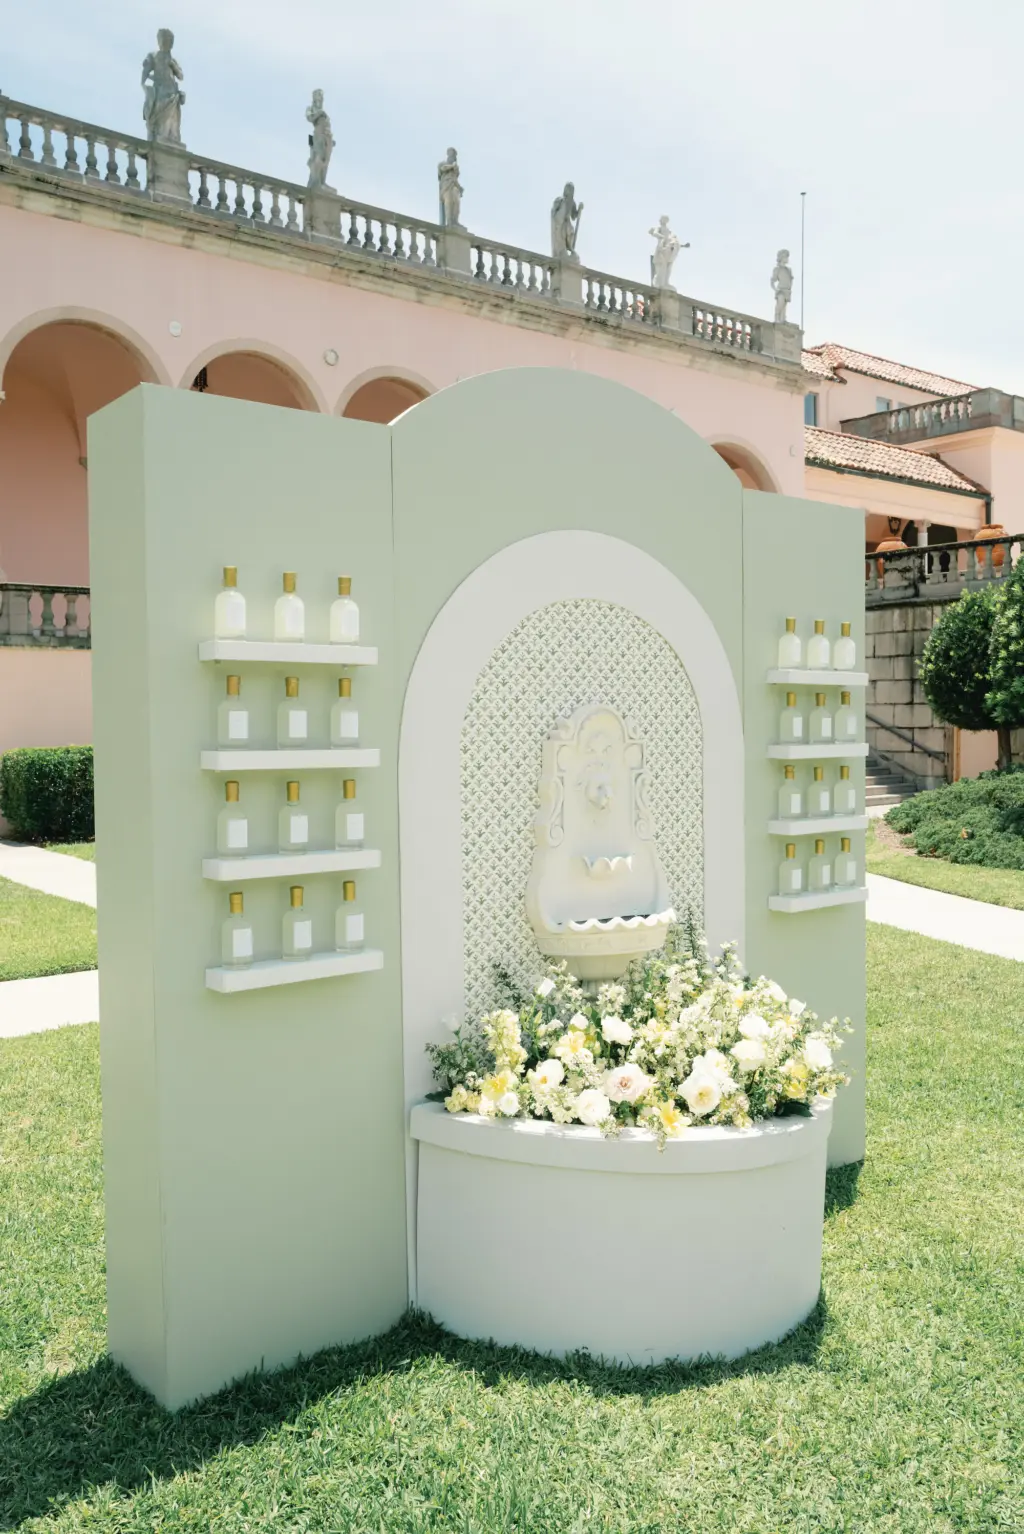 Unique Italian Fountain Table Seating Chart Inspiration | Custom Labels on Limoncello Bottles for Wedding Reception Place Cards | Summer Decor Ideas